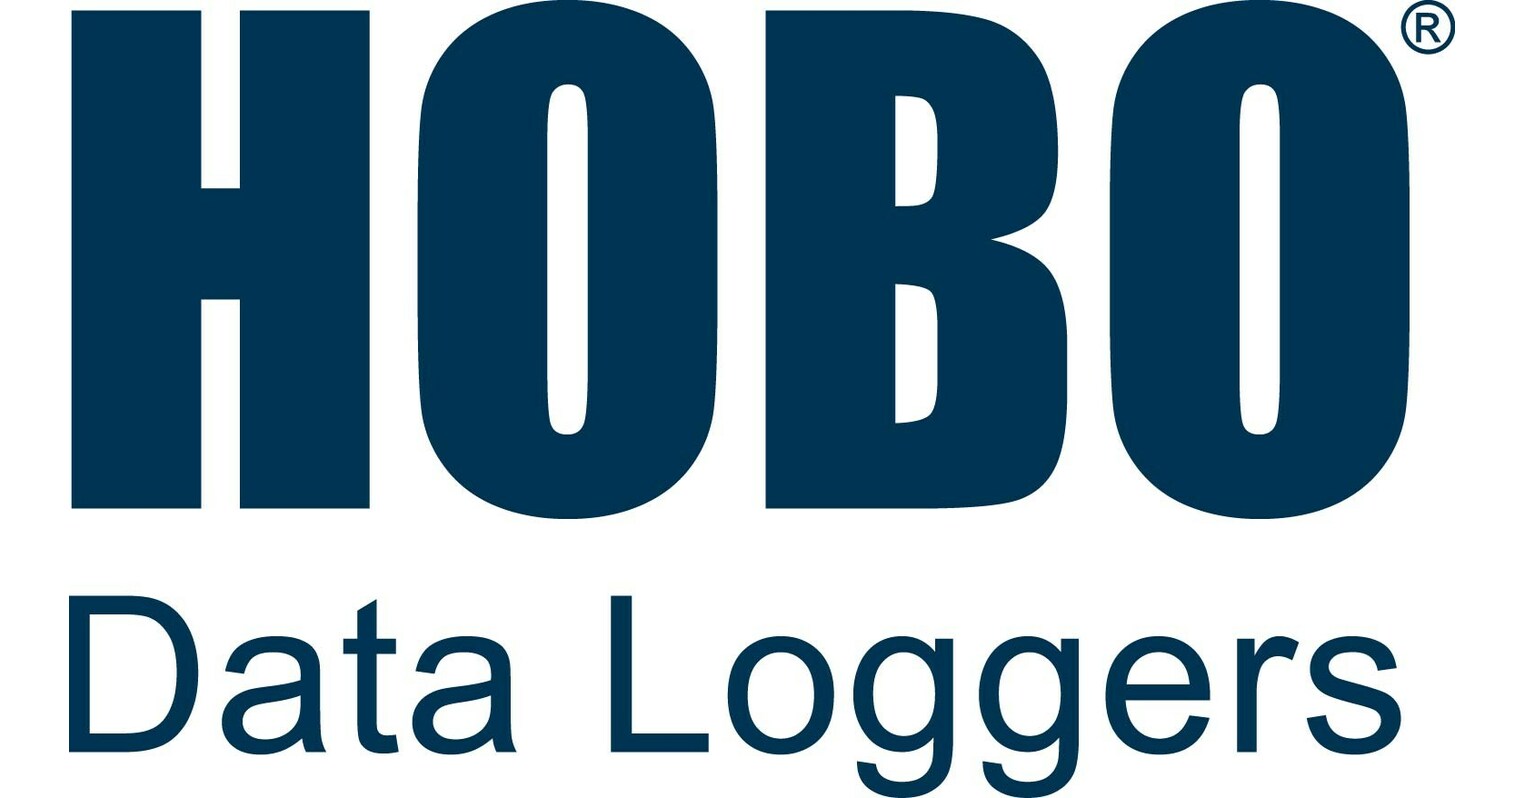 Onset honored with Technology Innovation Award for HOBO MX800 Multiparameter Water Quality Data Loggers by Cape Cod Technology Council